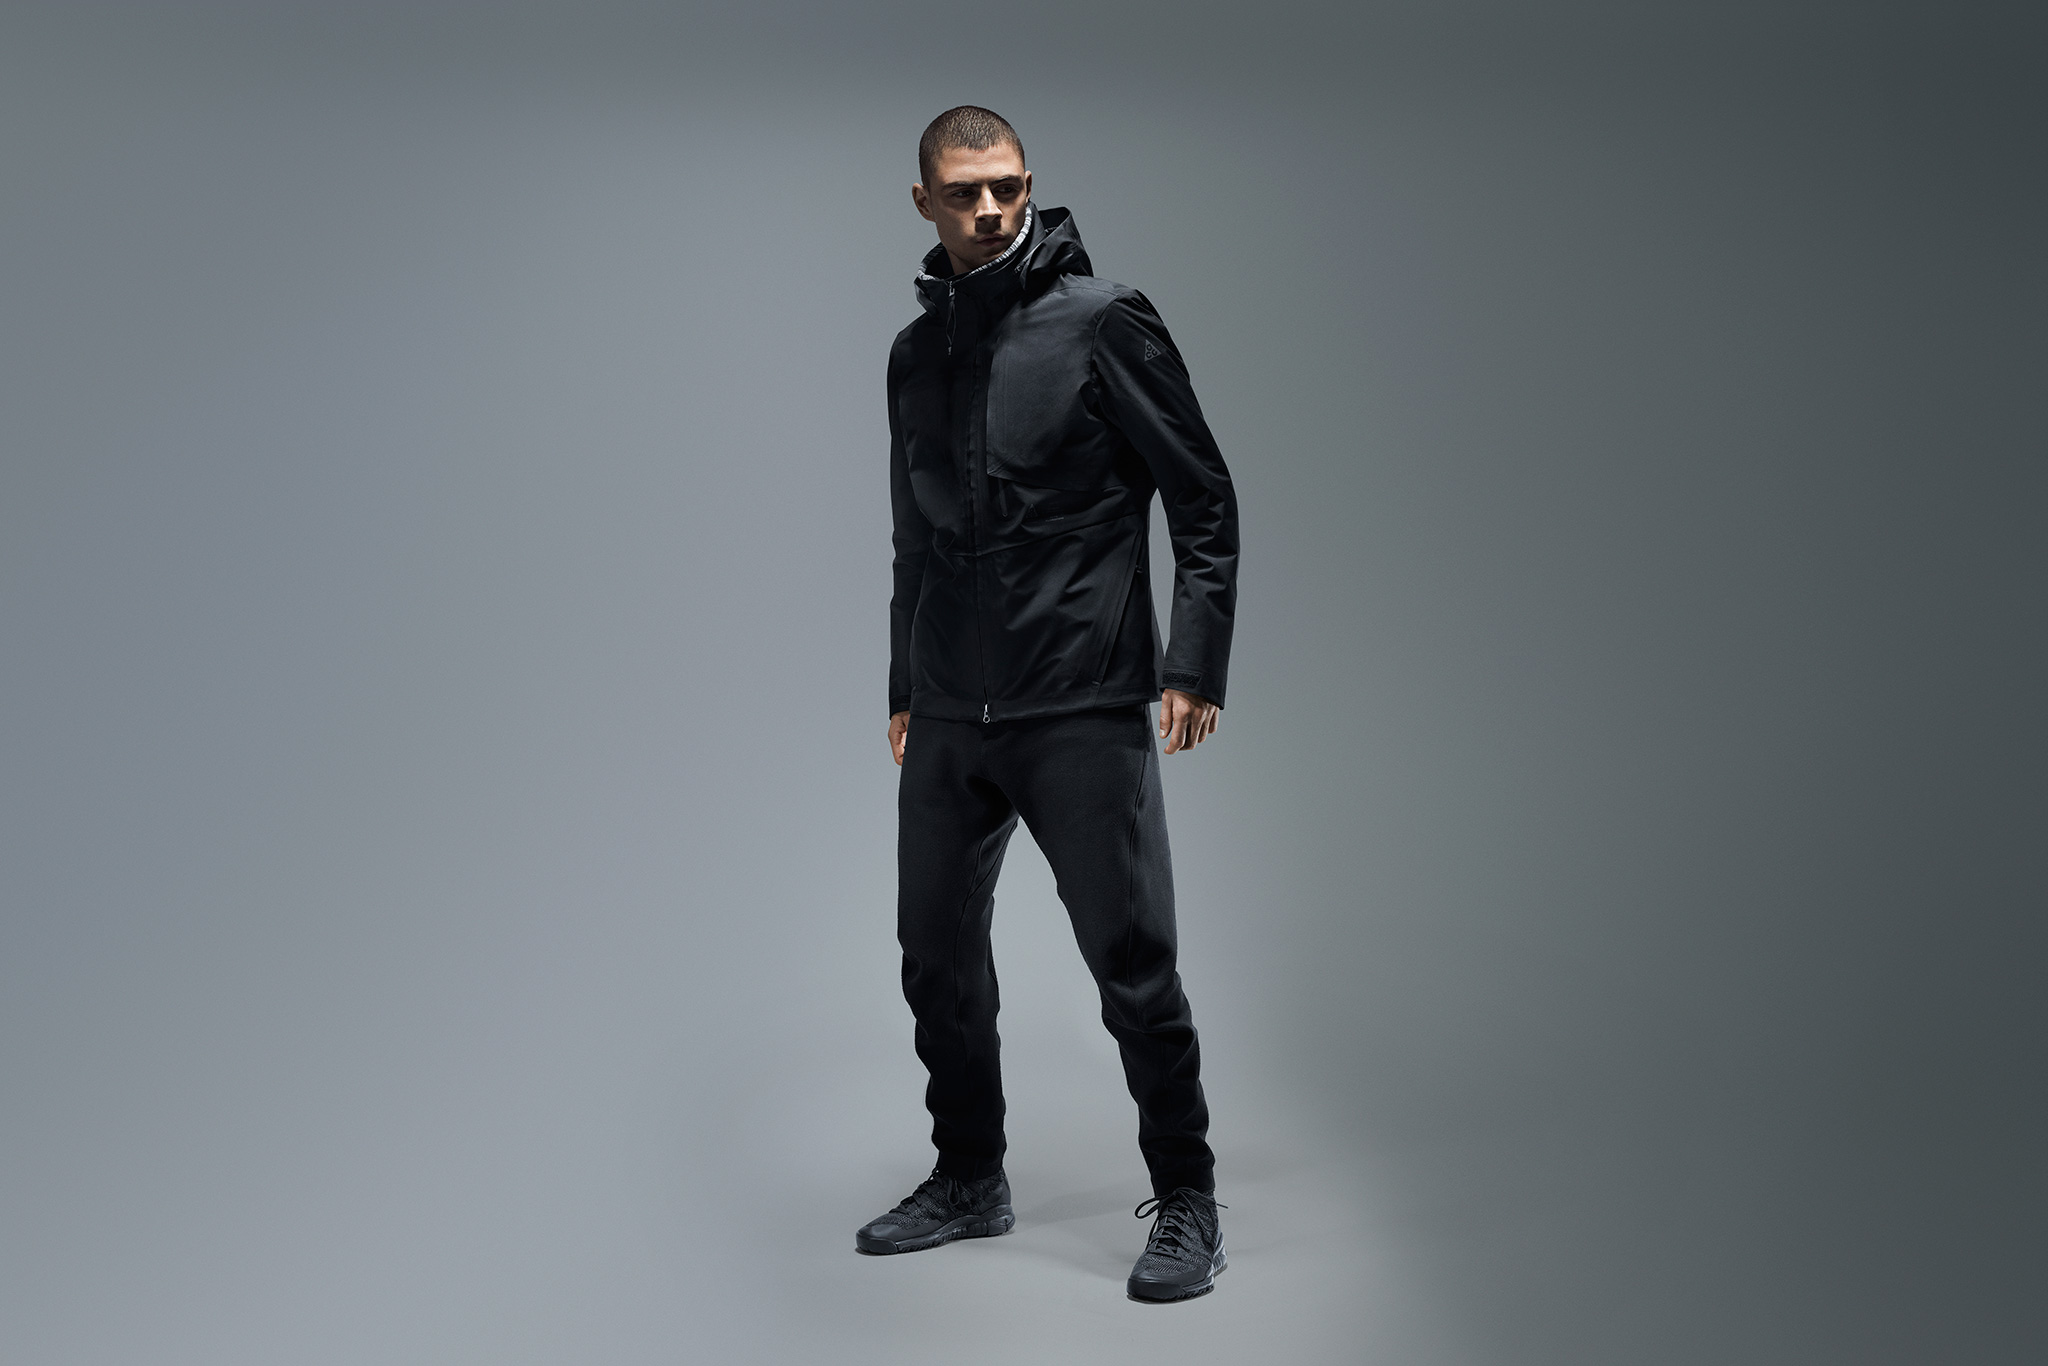 NikeLab Presents a New Direction for ACG, Bringing Outdoor Gear to the